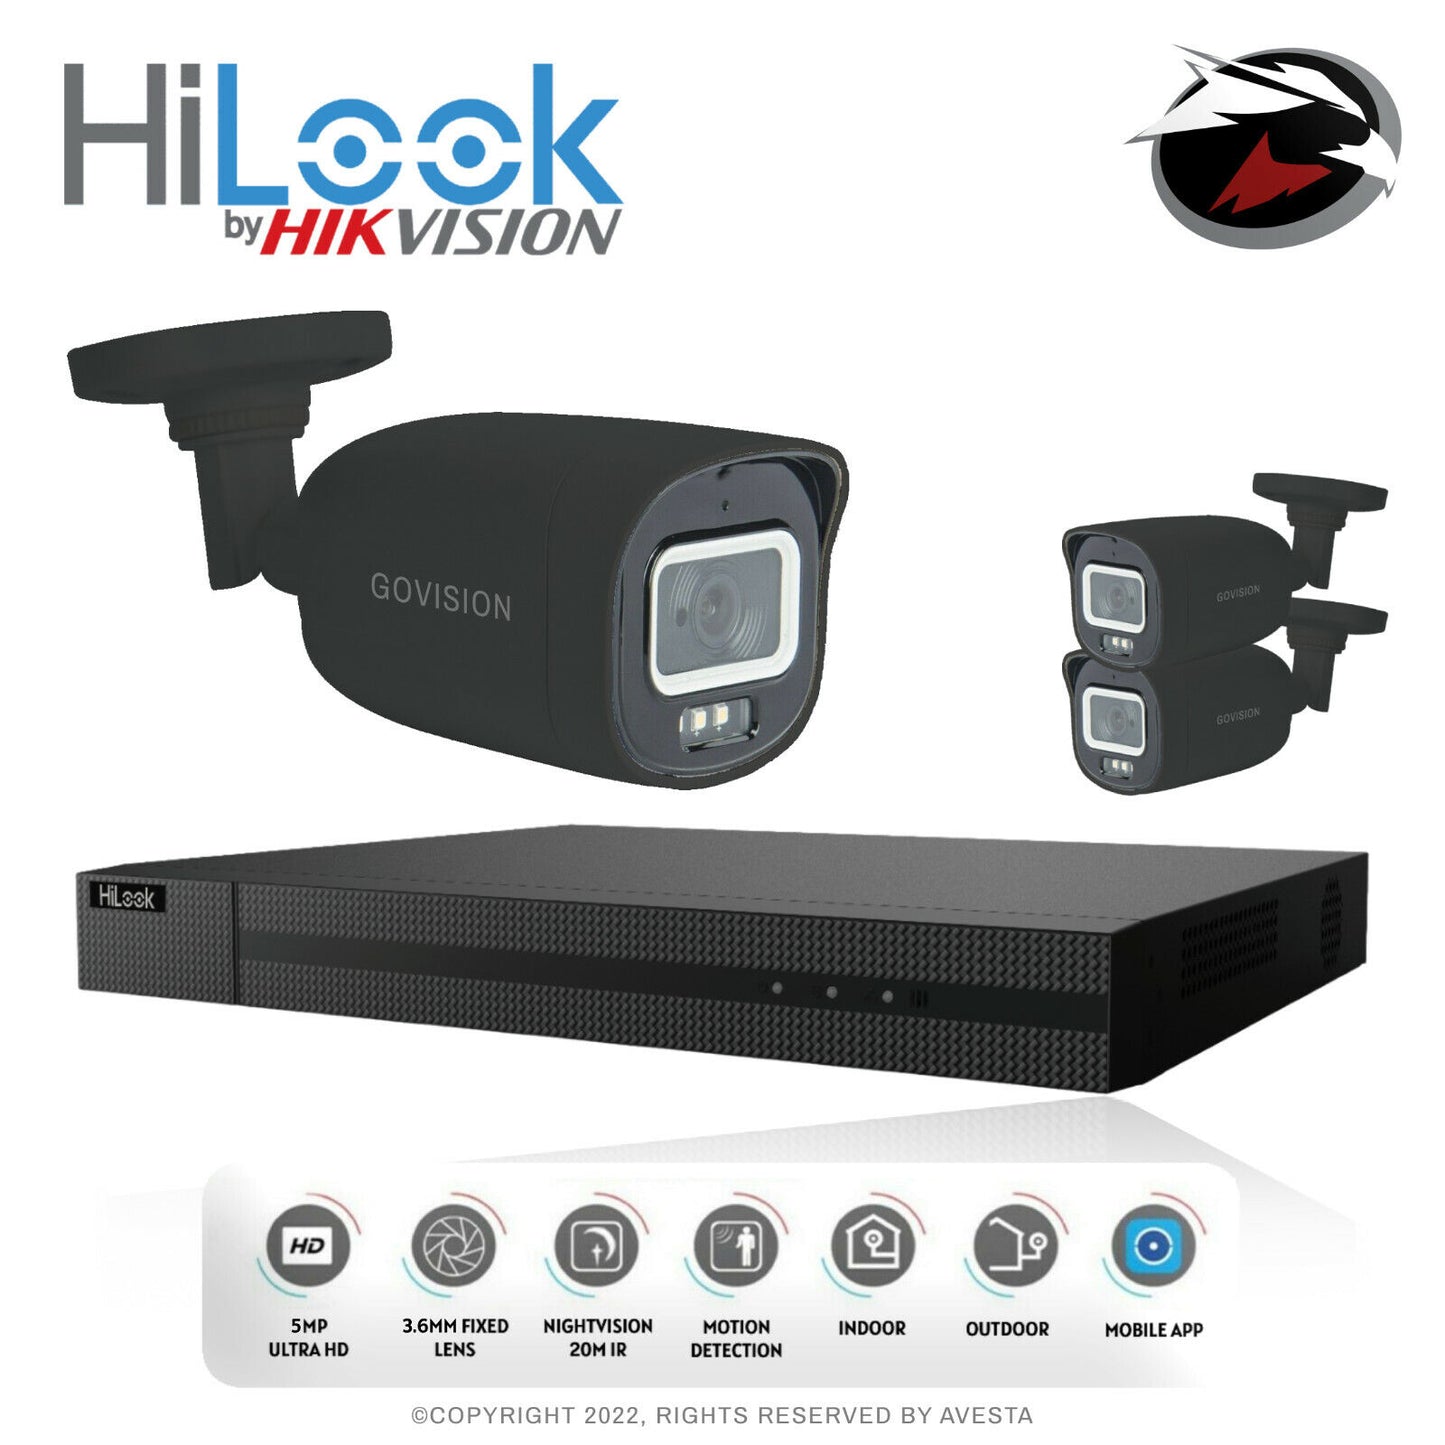 HIKVISION CCTV HD 5MP NIGHT VISION COLORFUL OUTDOOR DVR HOME SECURITY SYSTEM KIT 4CH DVR 3x Cameras (gray) 1TB HDD